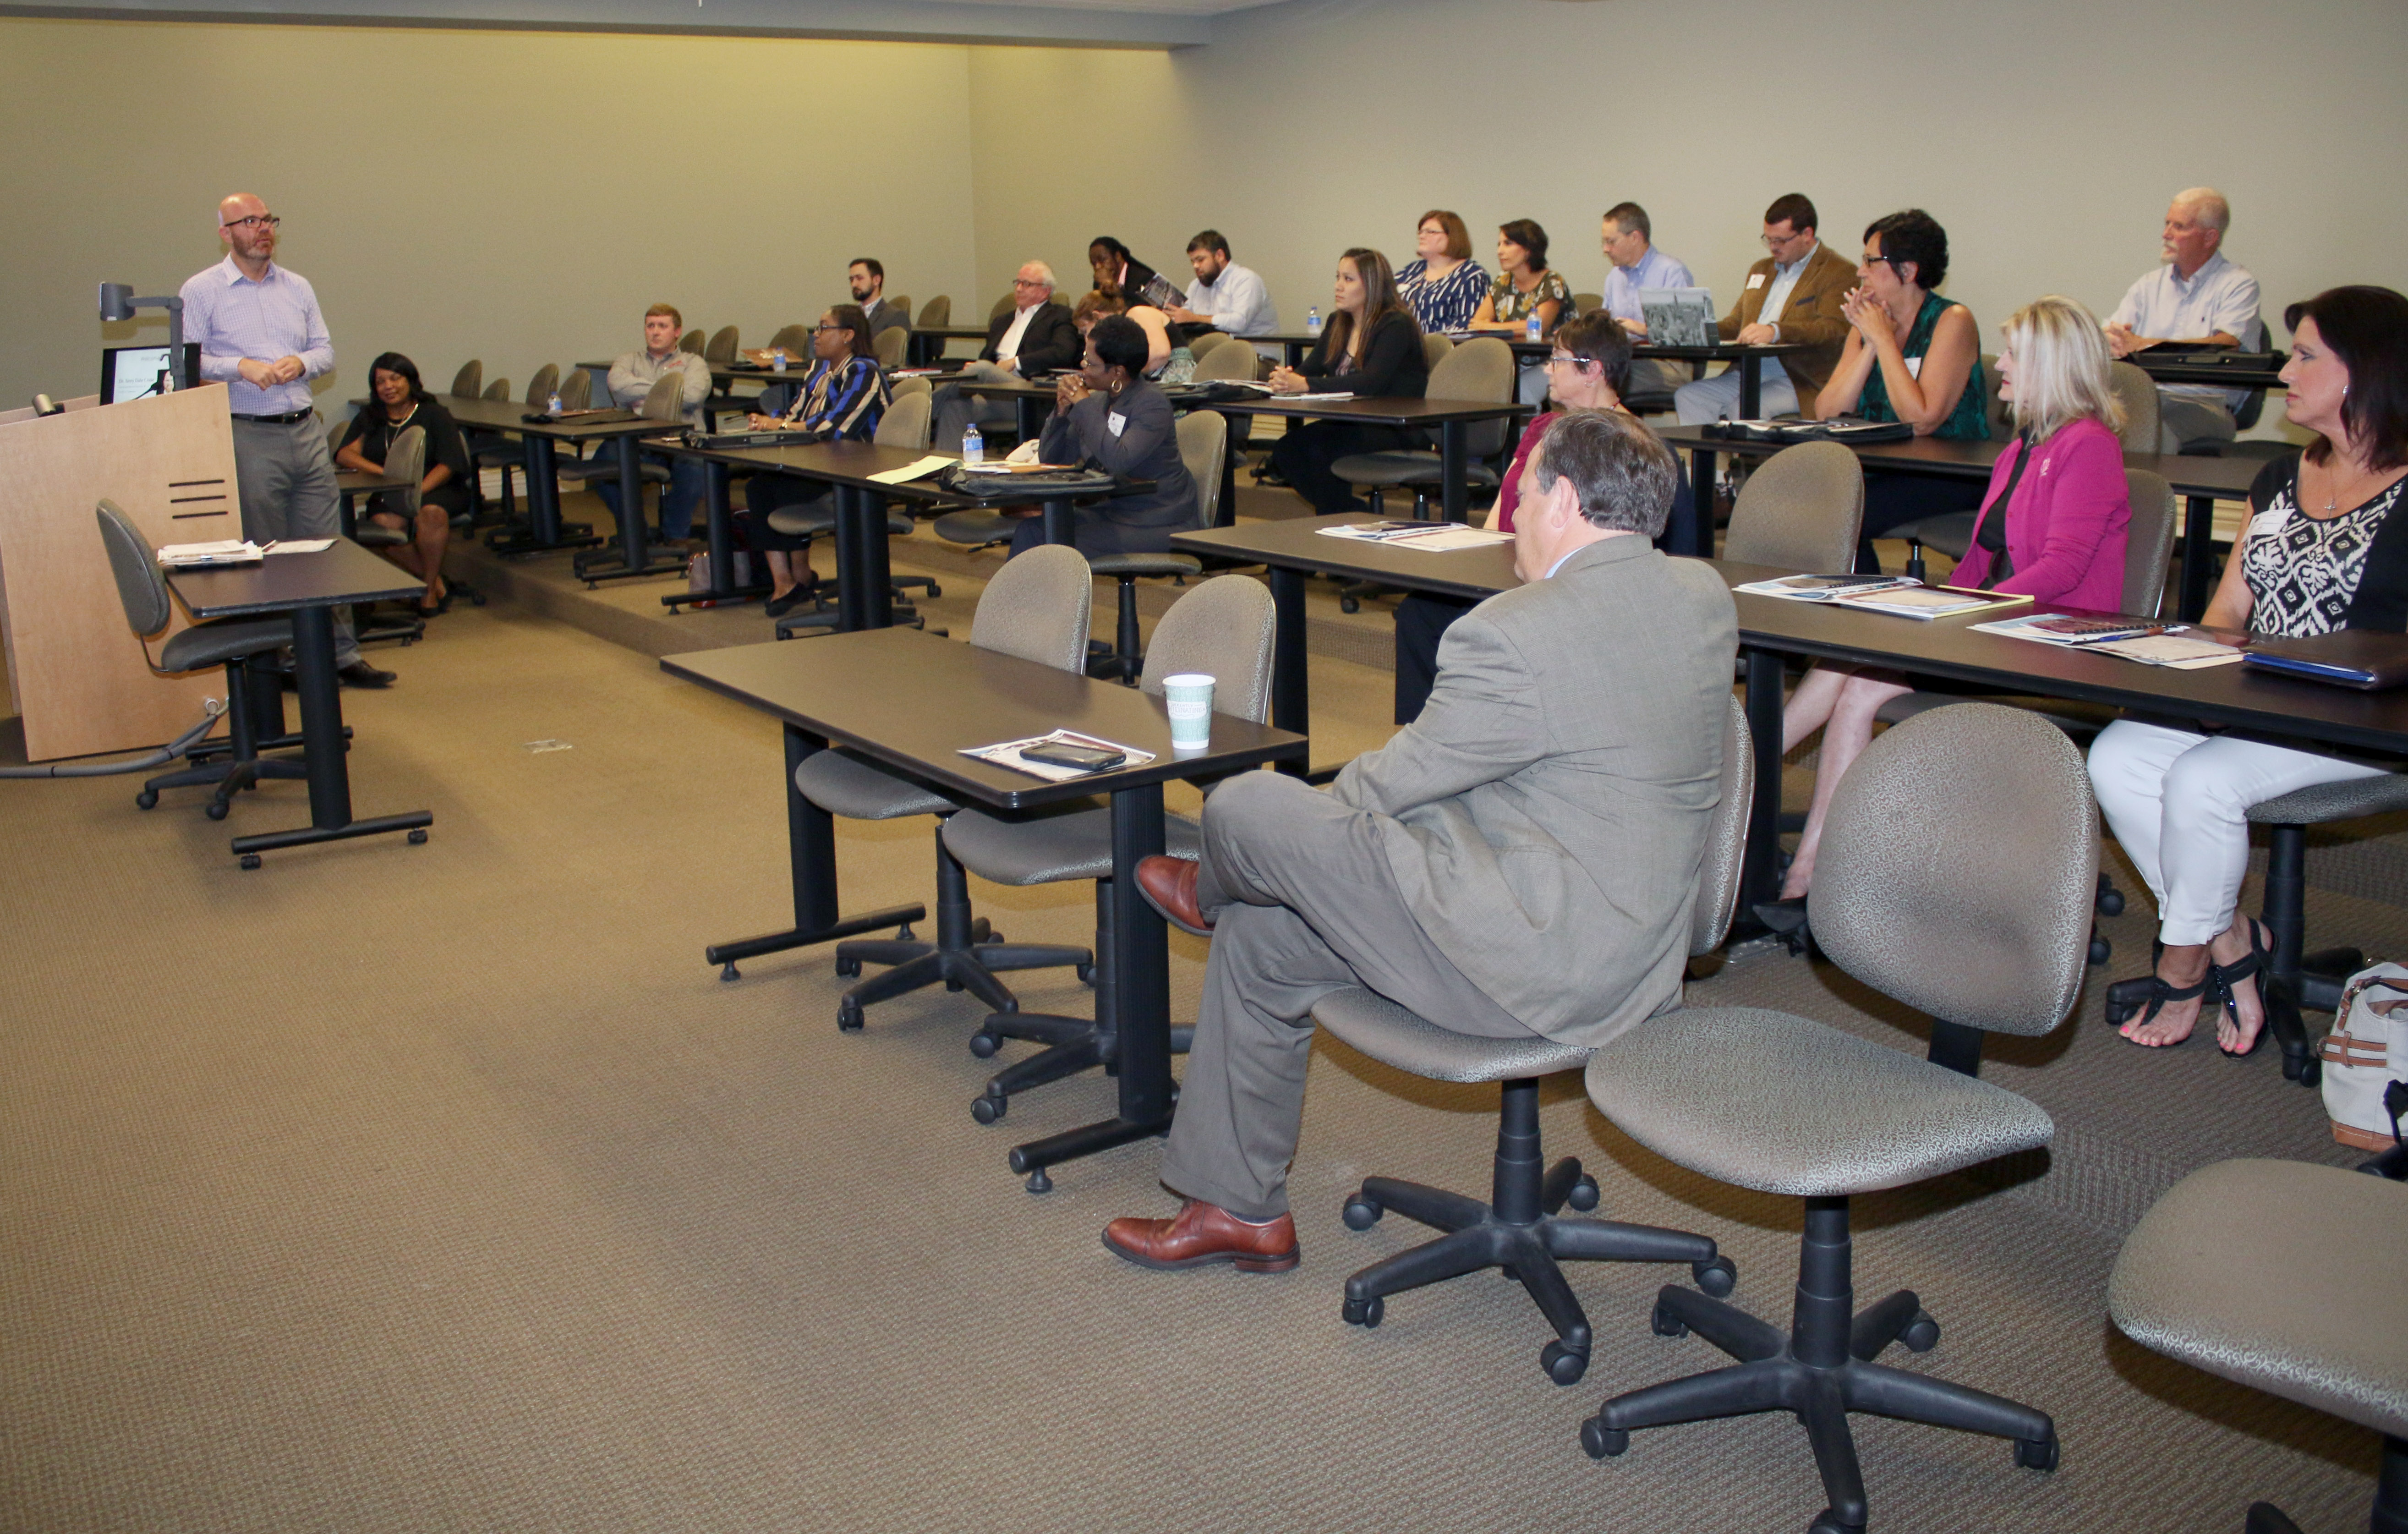 Dr. Terry Dale Cruse welcomes the inaugural class of Professional MBA students.